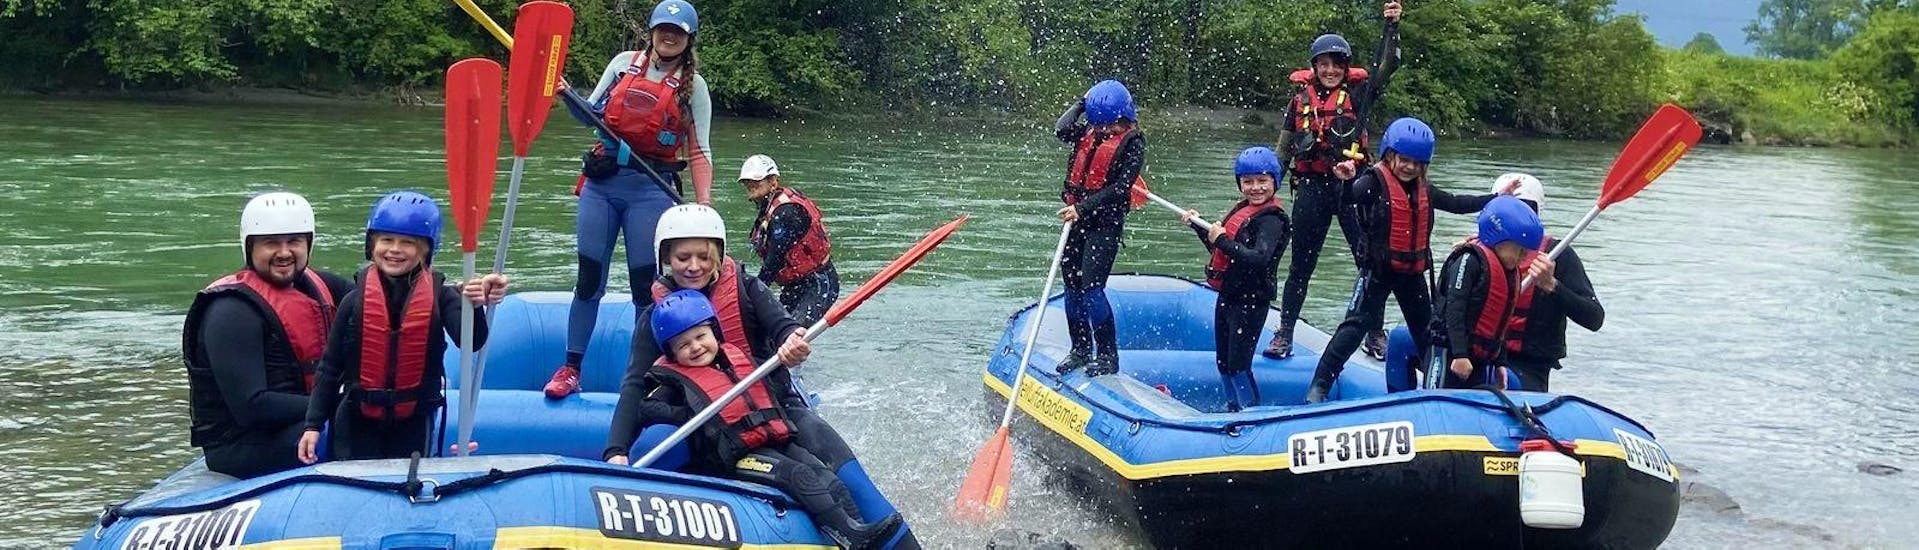 A rafting group is having fun on two boats during their Soft Rafting on the Ziller River with Freiluftakademie Zillertal.